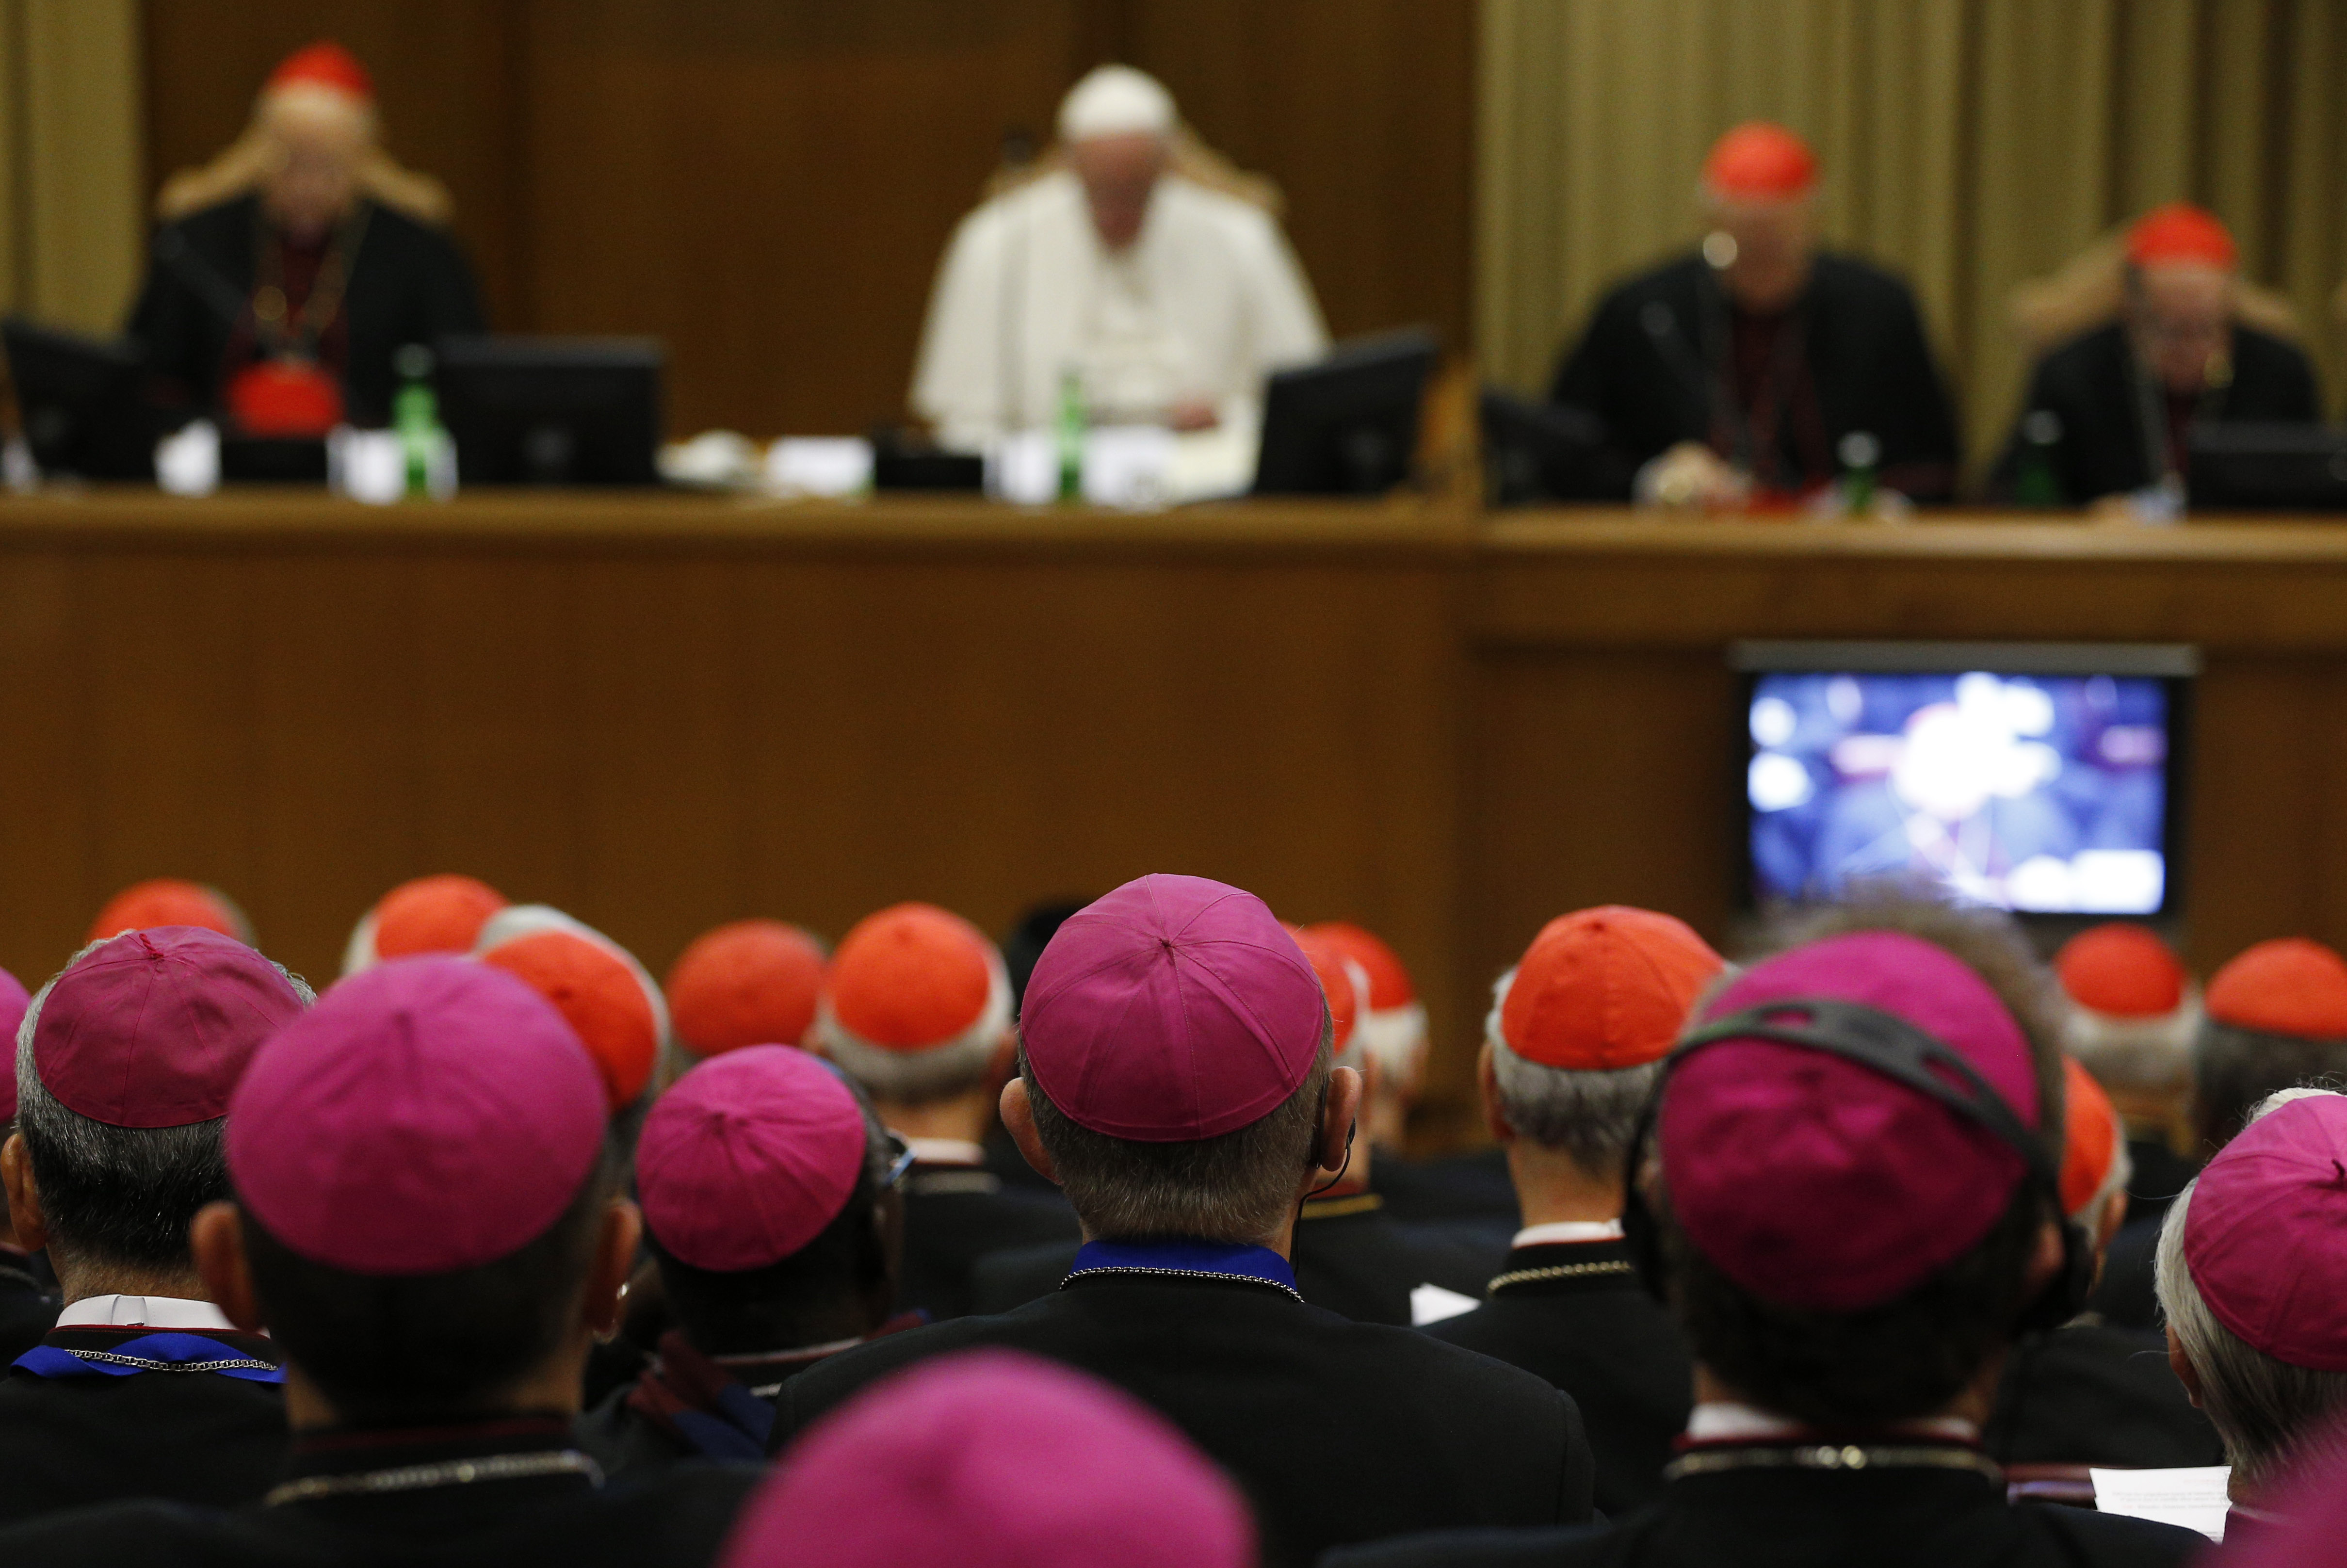 Bishops and cardinals attend a session of the Synod of Bishops on the family led by Pope Francis at the Vatican Oct. 23. (CNS photo/Paul Haring) See SYNOD-JUDGE-LISTEN Oct. 23, 2015.